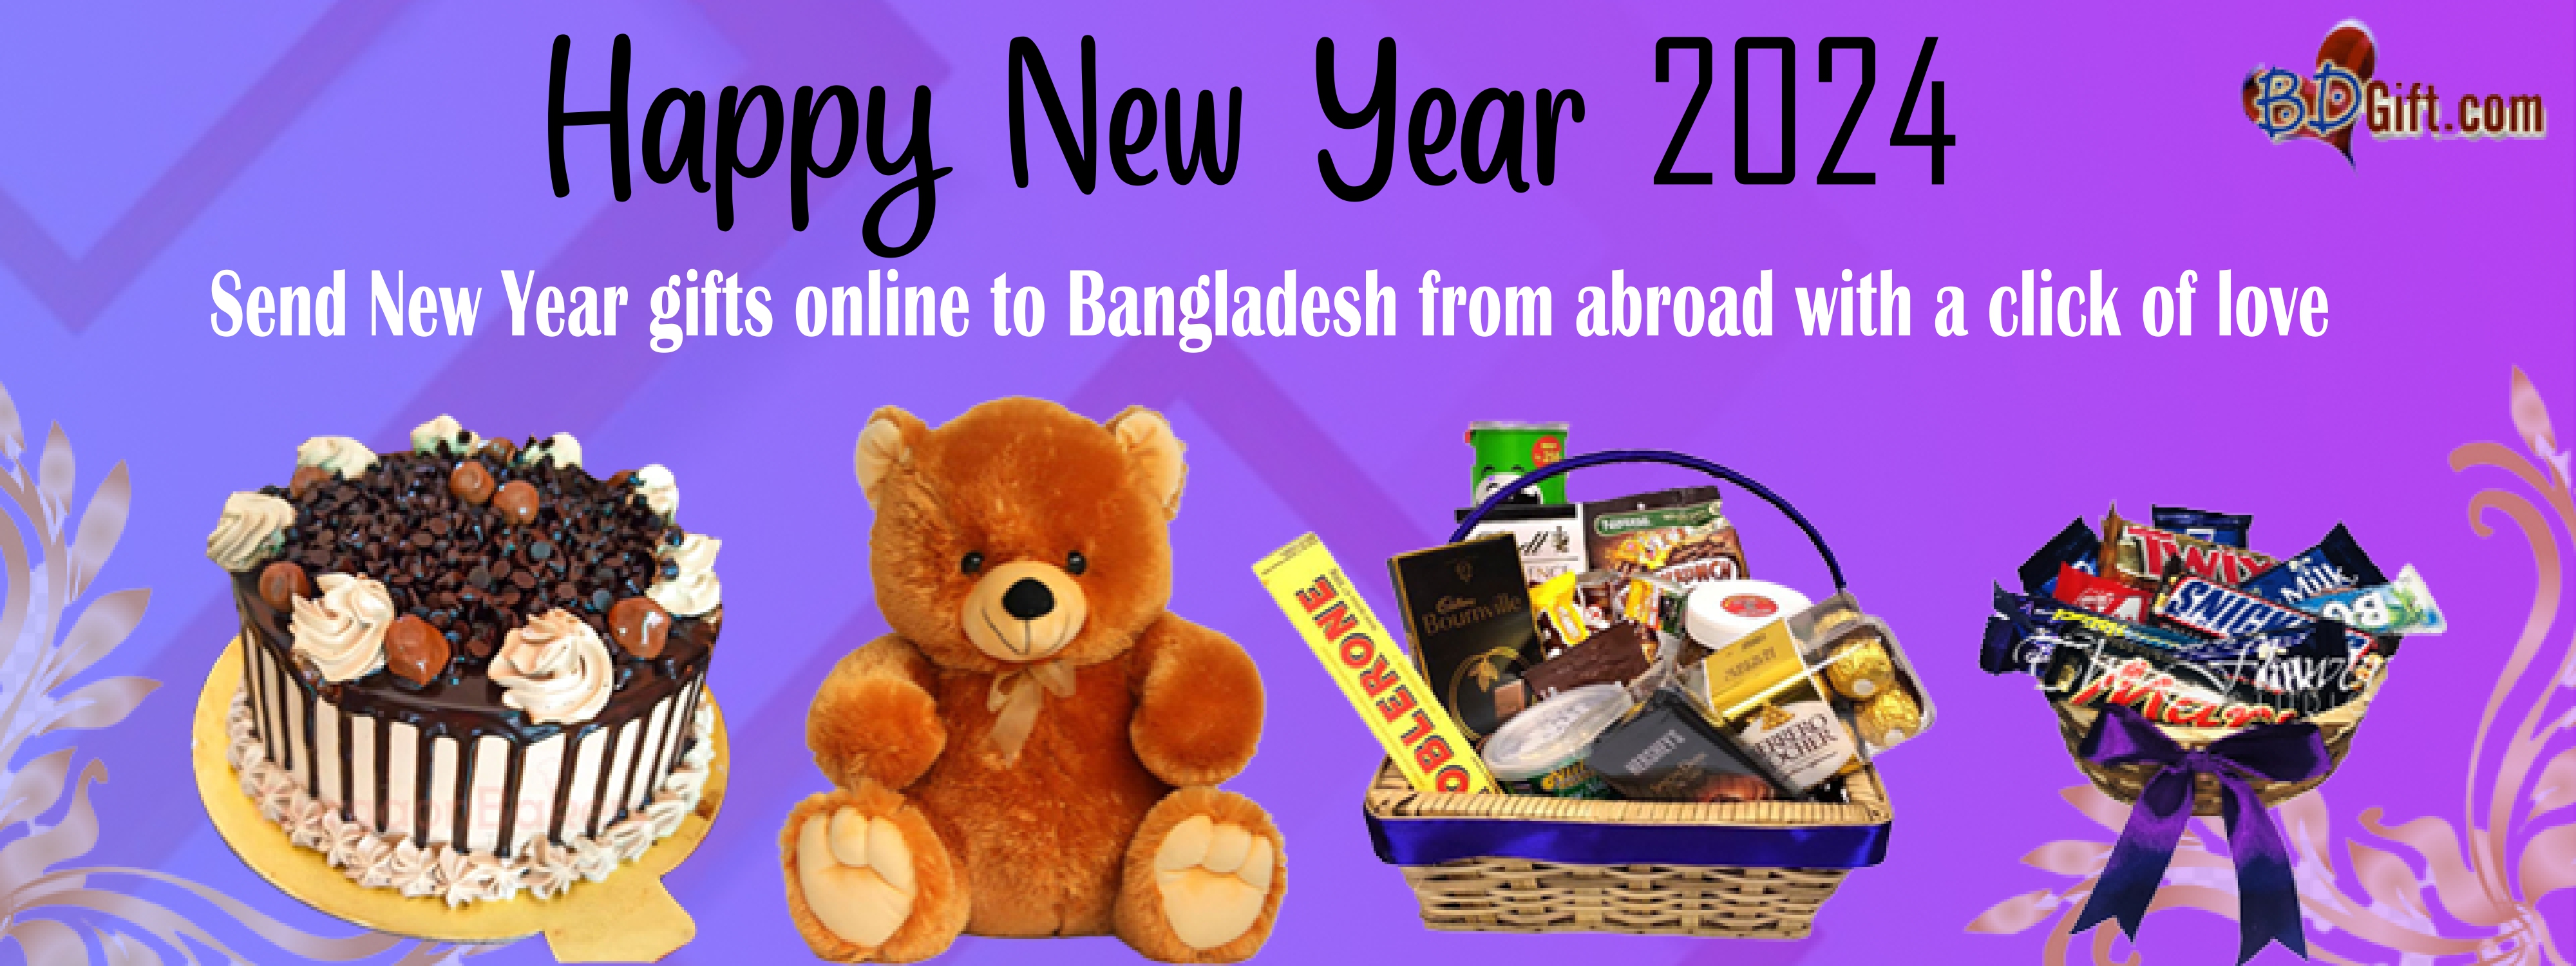 Send New Year Gifts to Bangladesh from Abroad - Same Day Delivery